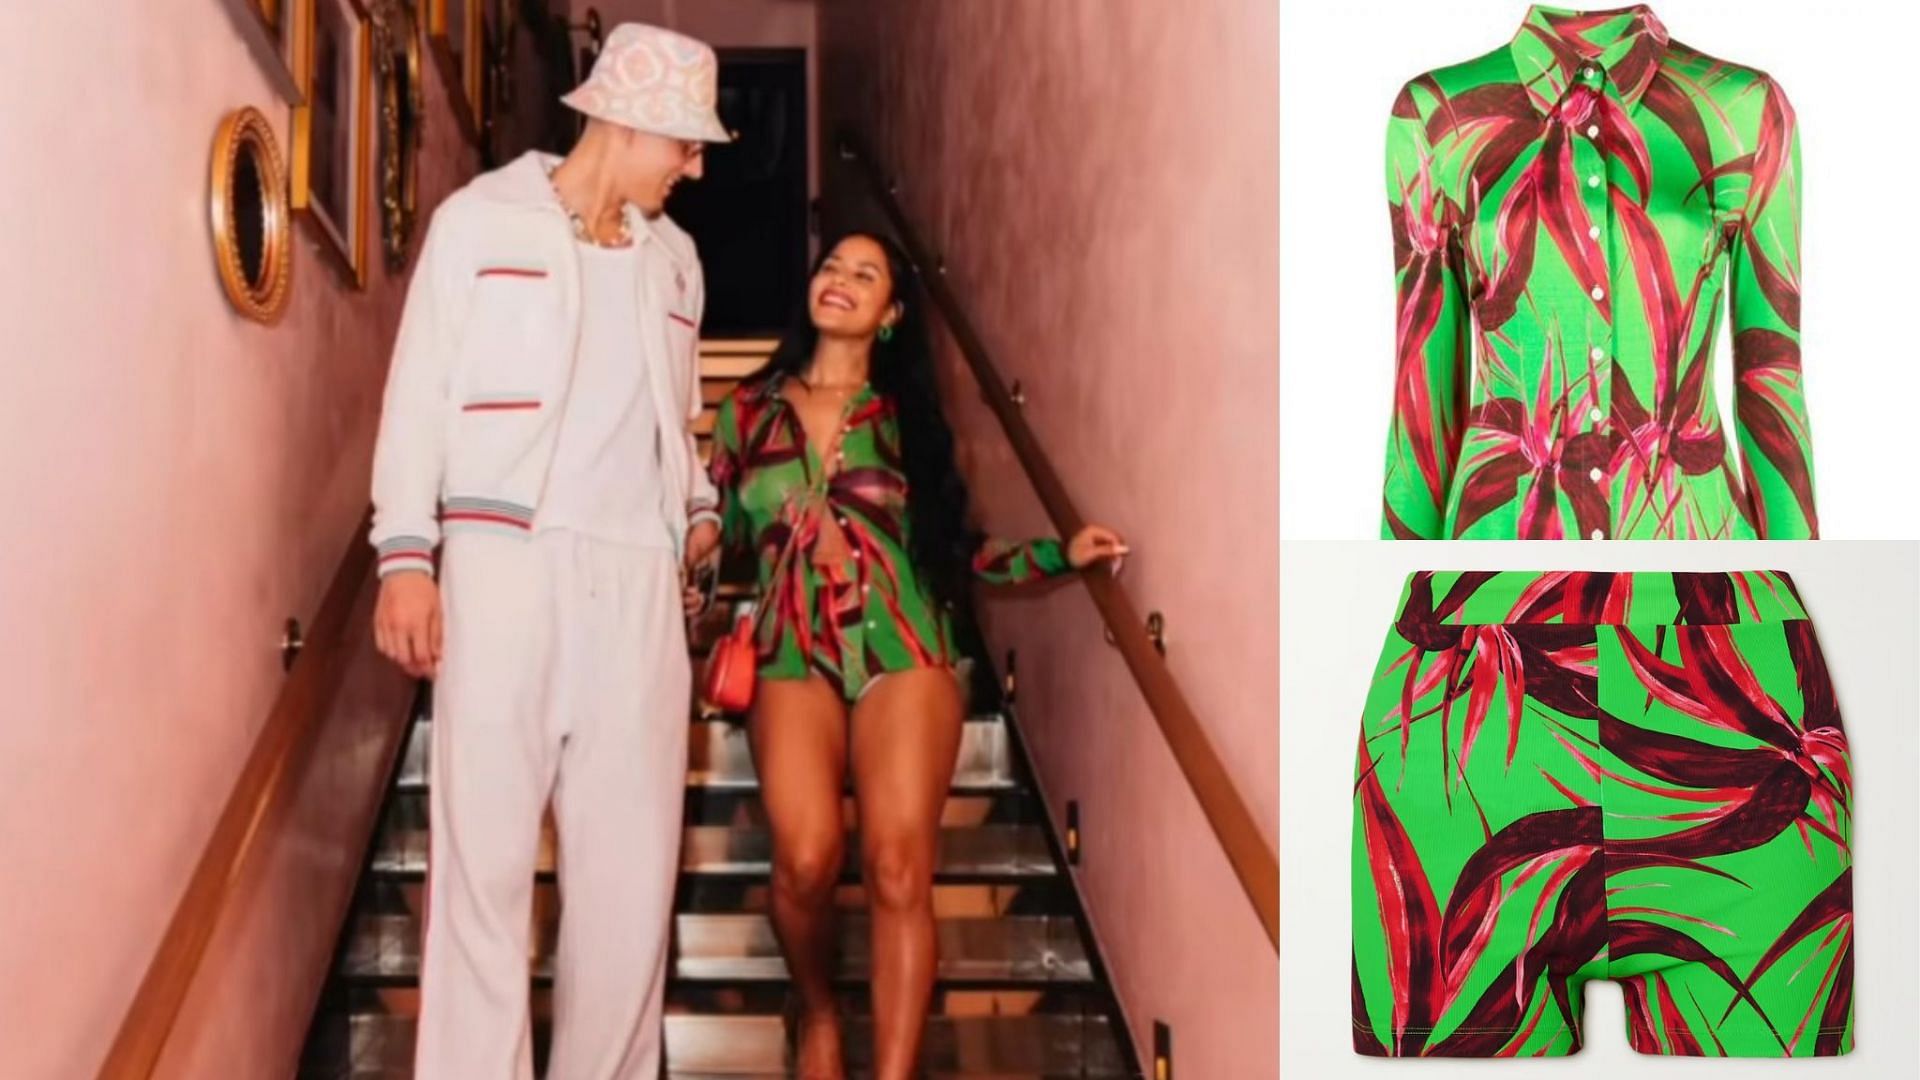 Katya Elise Henry posts endearing Instagram photo with boyfriend Tyler Herro while pulling off $700 Louisa Ballou outfit